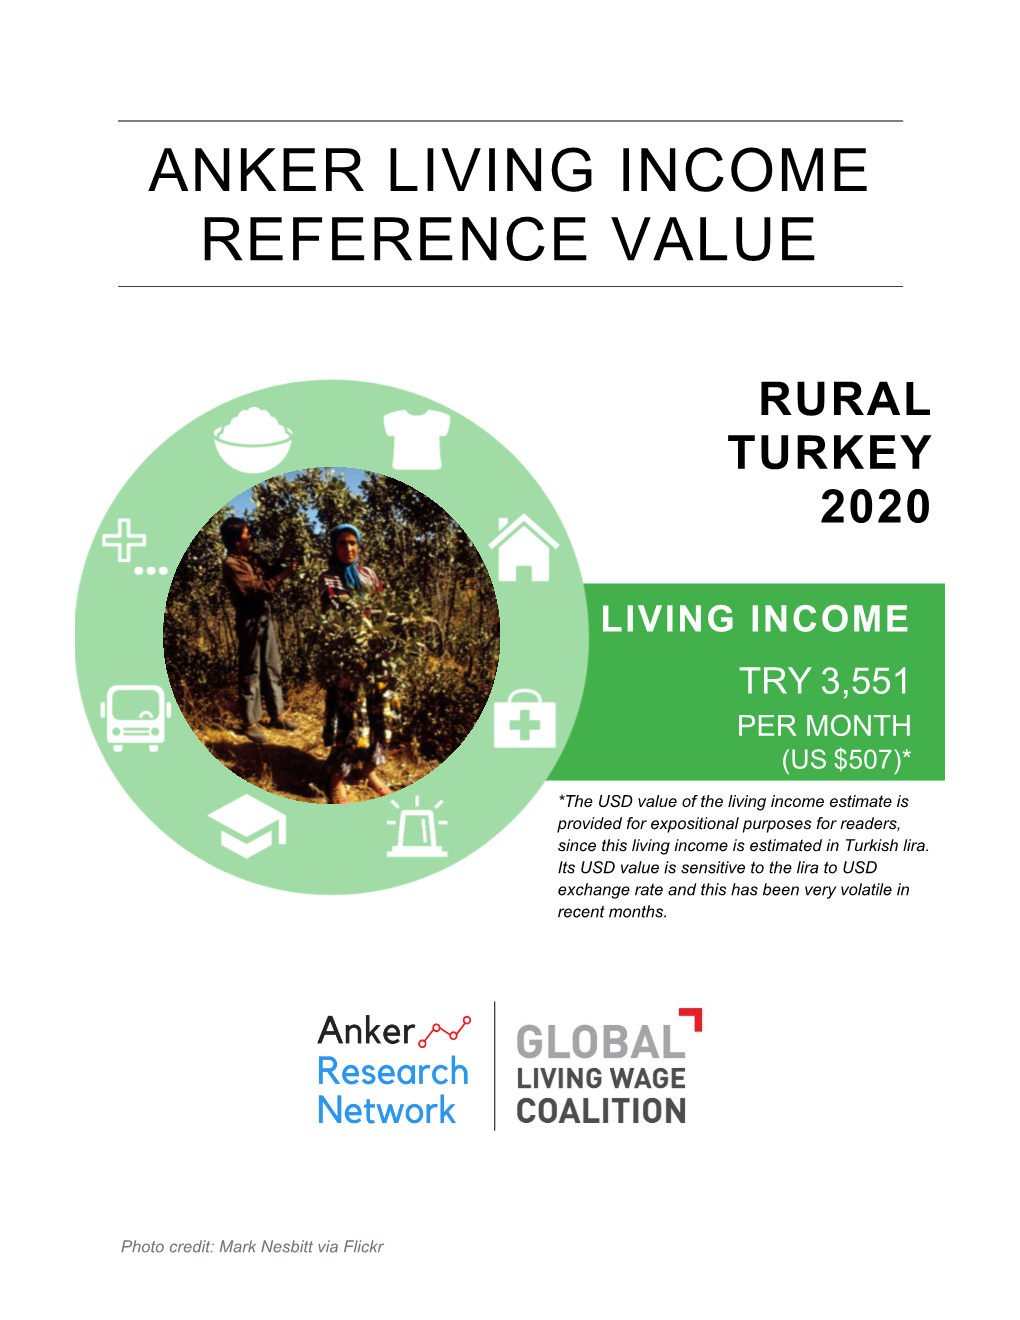 Anker Living Income Reference Value for Rural Turkey 2020